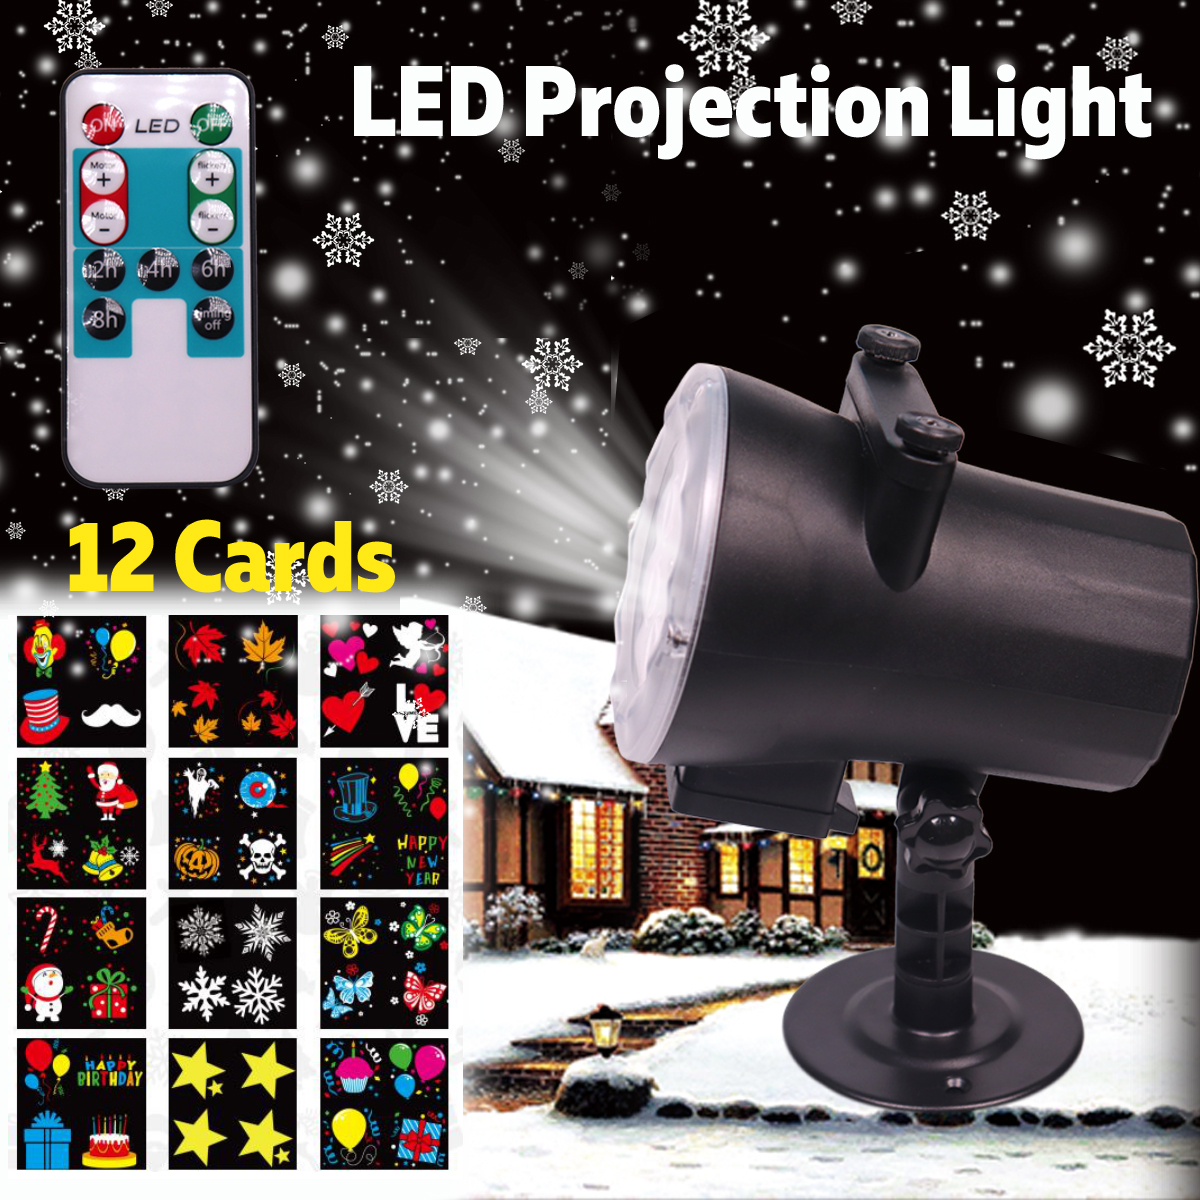 LED-Stage-Light-Waterproof-Projection-Lamp-Outdoors-Projector-12Card-Remote-Control-Light-1343293-2